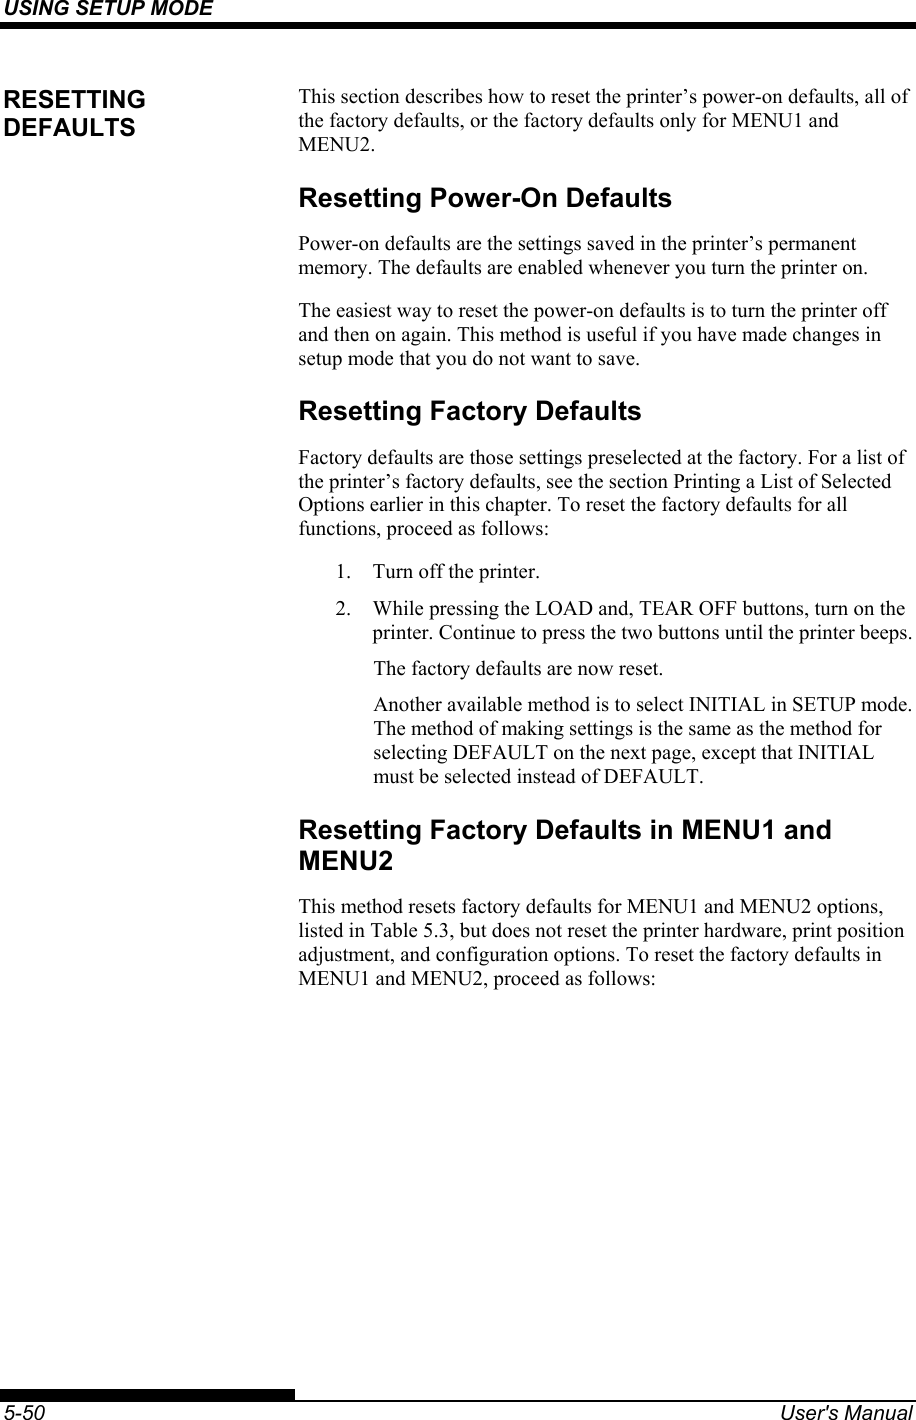 USING SETUP MODE    5-50  User&apos;s Manual This section describes how to reset the printer’s power-on defaults, all of the factory defaults, or the factory defaults only for MENU1 and MENU2. Resetting Power-On Defaults Power-on defaults are the settings saved in the printer’s permanent memory. The defaults are enabled whenever you turn the printer on. The easiest way to reset the power-on defaults is to turn the printer off and then on again. This method is useful if you have made changes in setup mode that you do not want to save. Resetting Factory Defaults Factory defaults are those settings preselected at the factory. For a list of the printer’s factory defaults, see the section Printing a List of Selected Options earlier in this chapter. To reset the factory defaults for all functions, proceed as follows: 1.  Turn off the printer. 2.  While pressing the LOAD and, TEAR OFF buttons, turn on the printer. Continue to press the two buttons until the printer beeps. The factory defaults are now reset. Another available method is to select INITIAL in SETUP mode.  The method of making settings is the same as the method for selecting DEFAULT on the next page, except that INITIAL must be selected instead of DEFAULT. Resetting Factory Defaults in MENU1 and MENU2 This method resets factory defaults for MENU1 and MENU2 options, listed in Table 5.3, but does not reset the printer hardware, print position adjustment, and configuration options. To reset the factory defaults in MENU1 and MENU2, proceed as follows: RESETTING DEFAULTS 